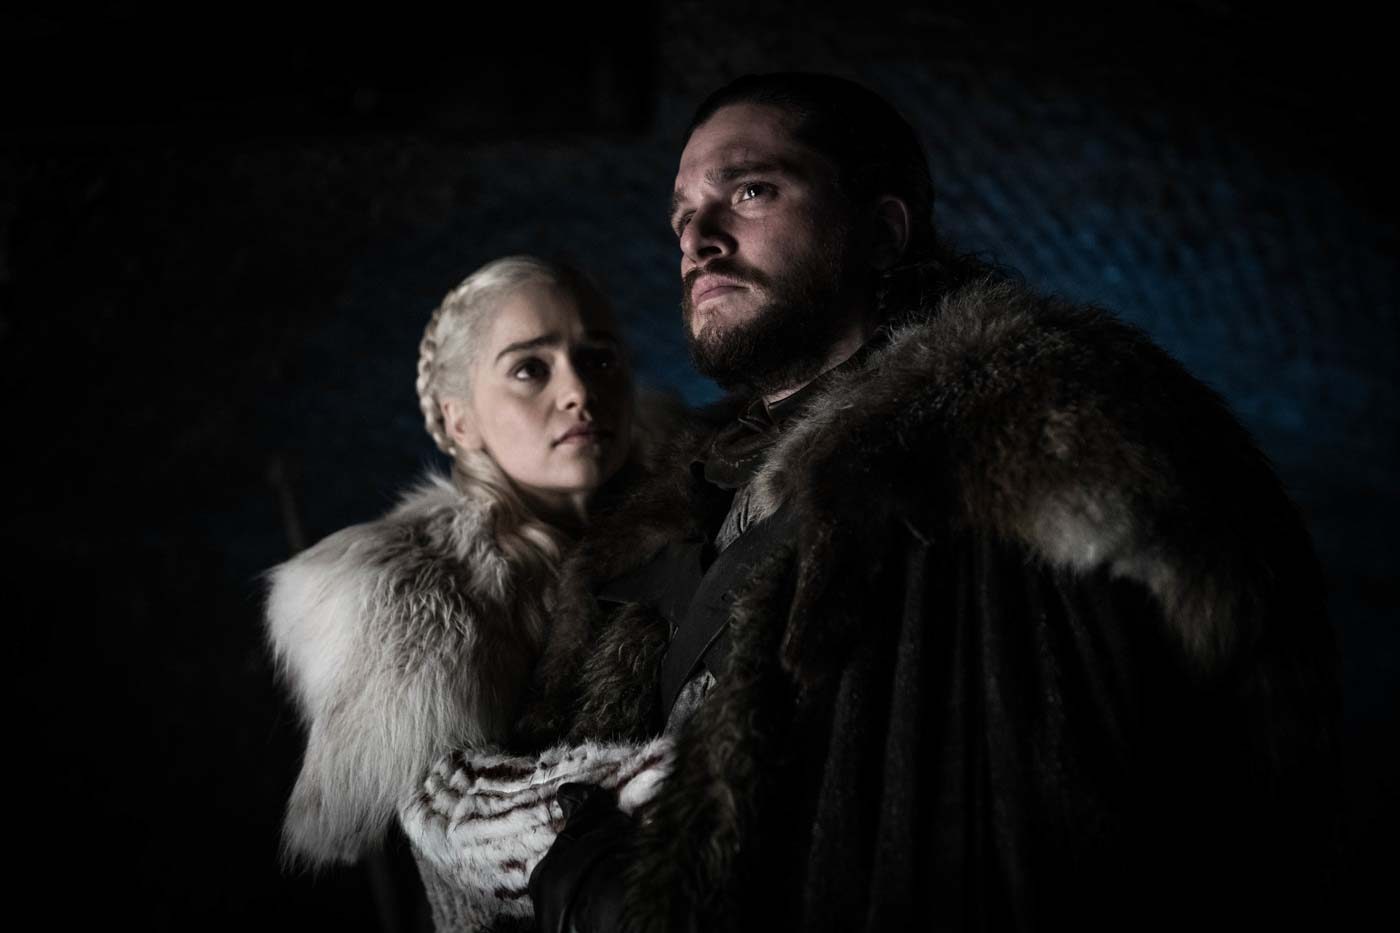 ‘Game of Thrones’: For HBO, piracy is ‘better than an Emmy’ as it battles Netflix